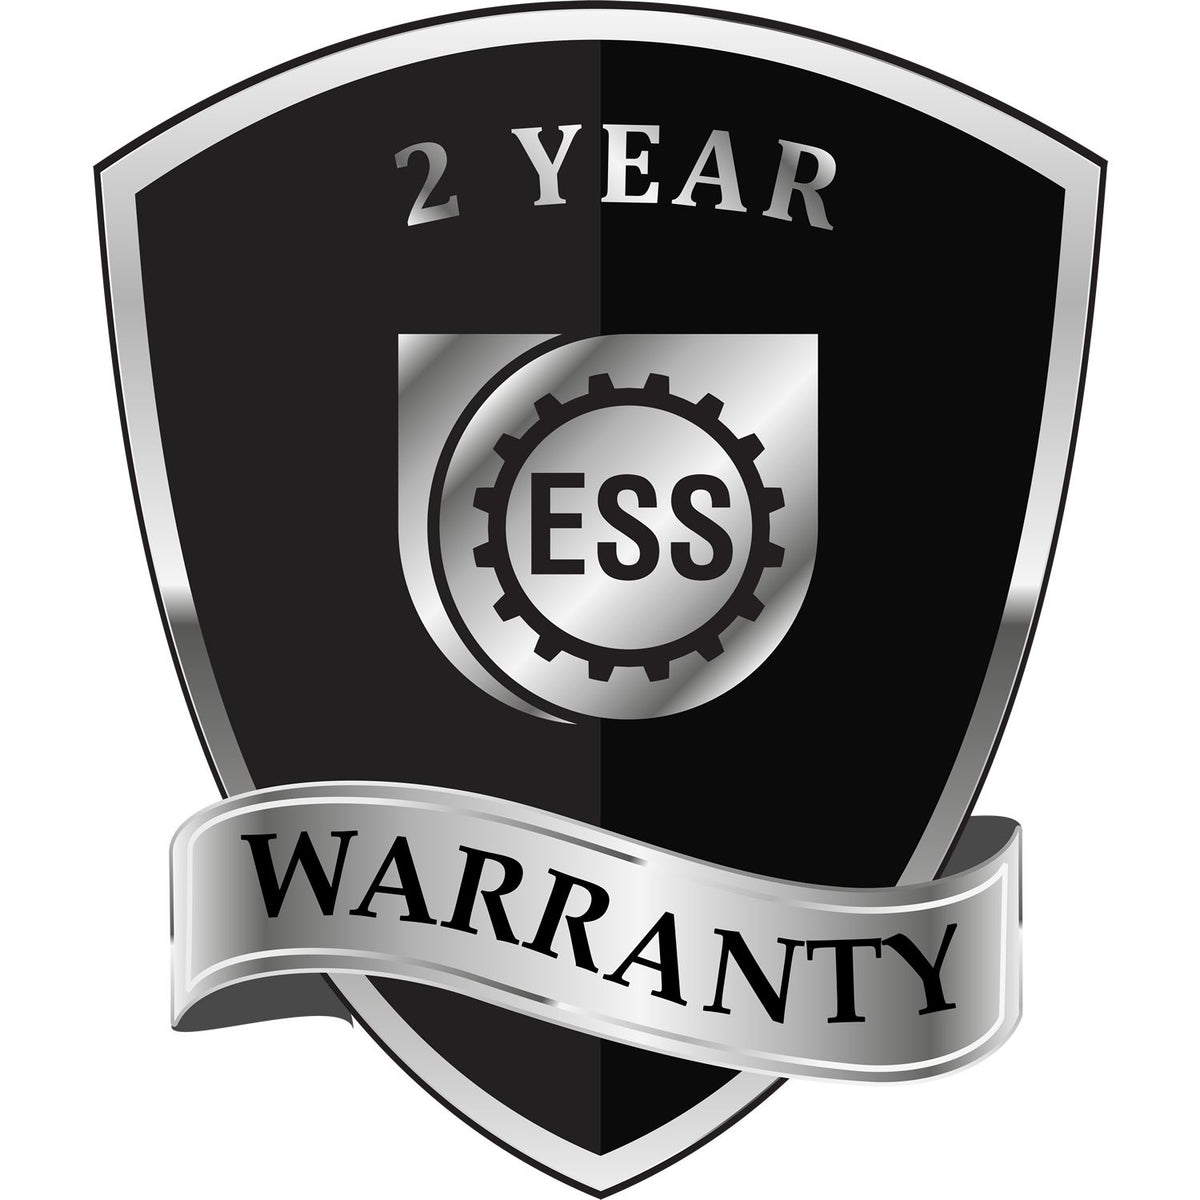 A black and silver badge or emblem showing warranty information for the Gift Alabama Engineer Seal